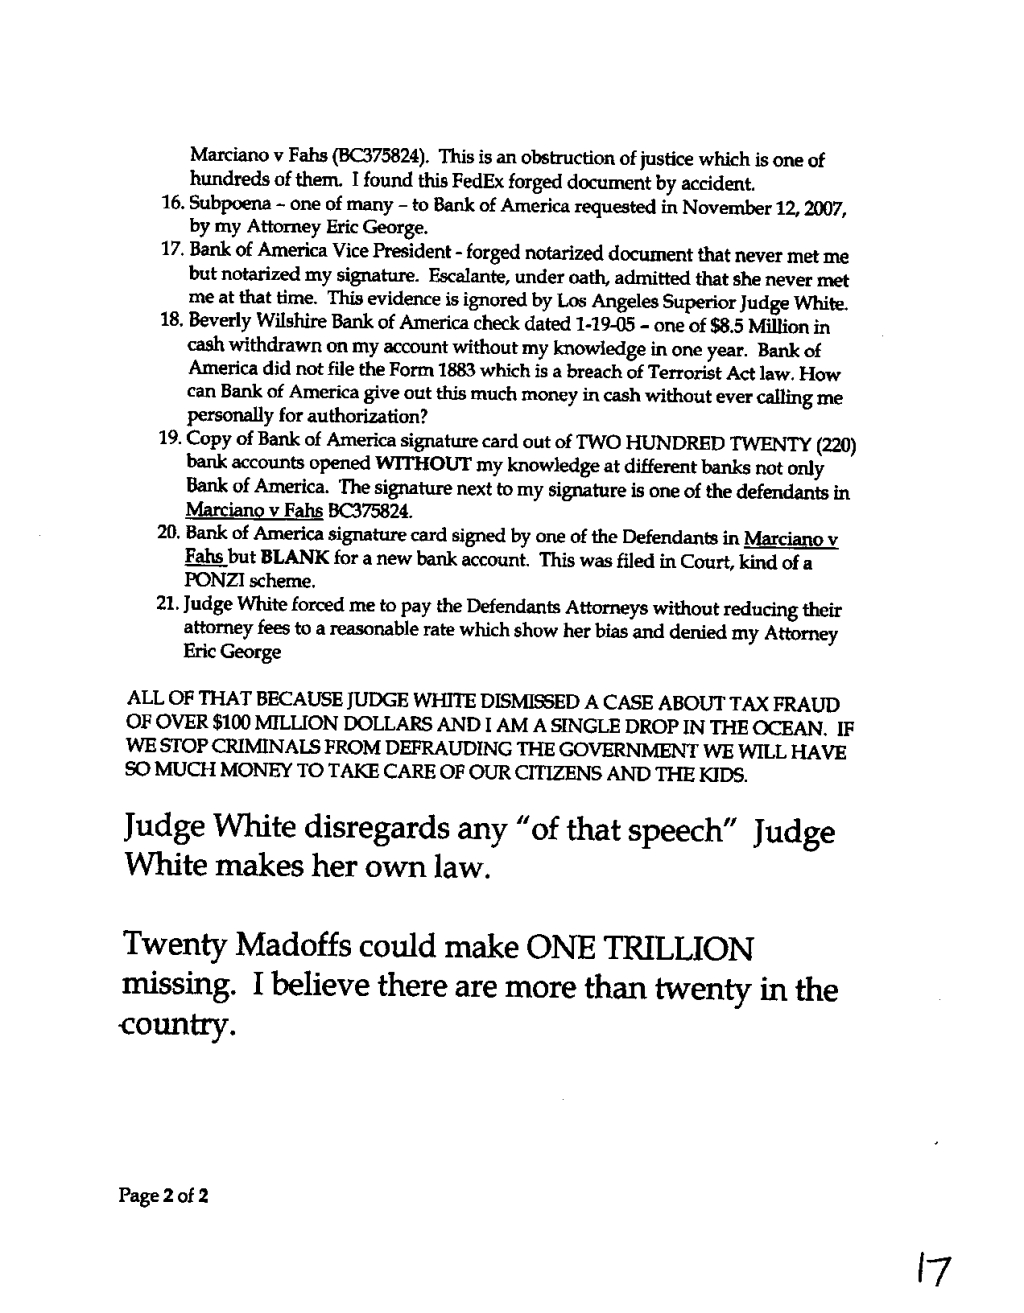 full complaint judge white for federal with exhibits_1_page17